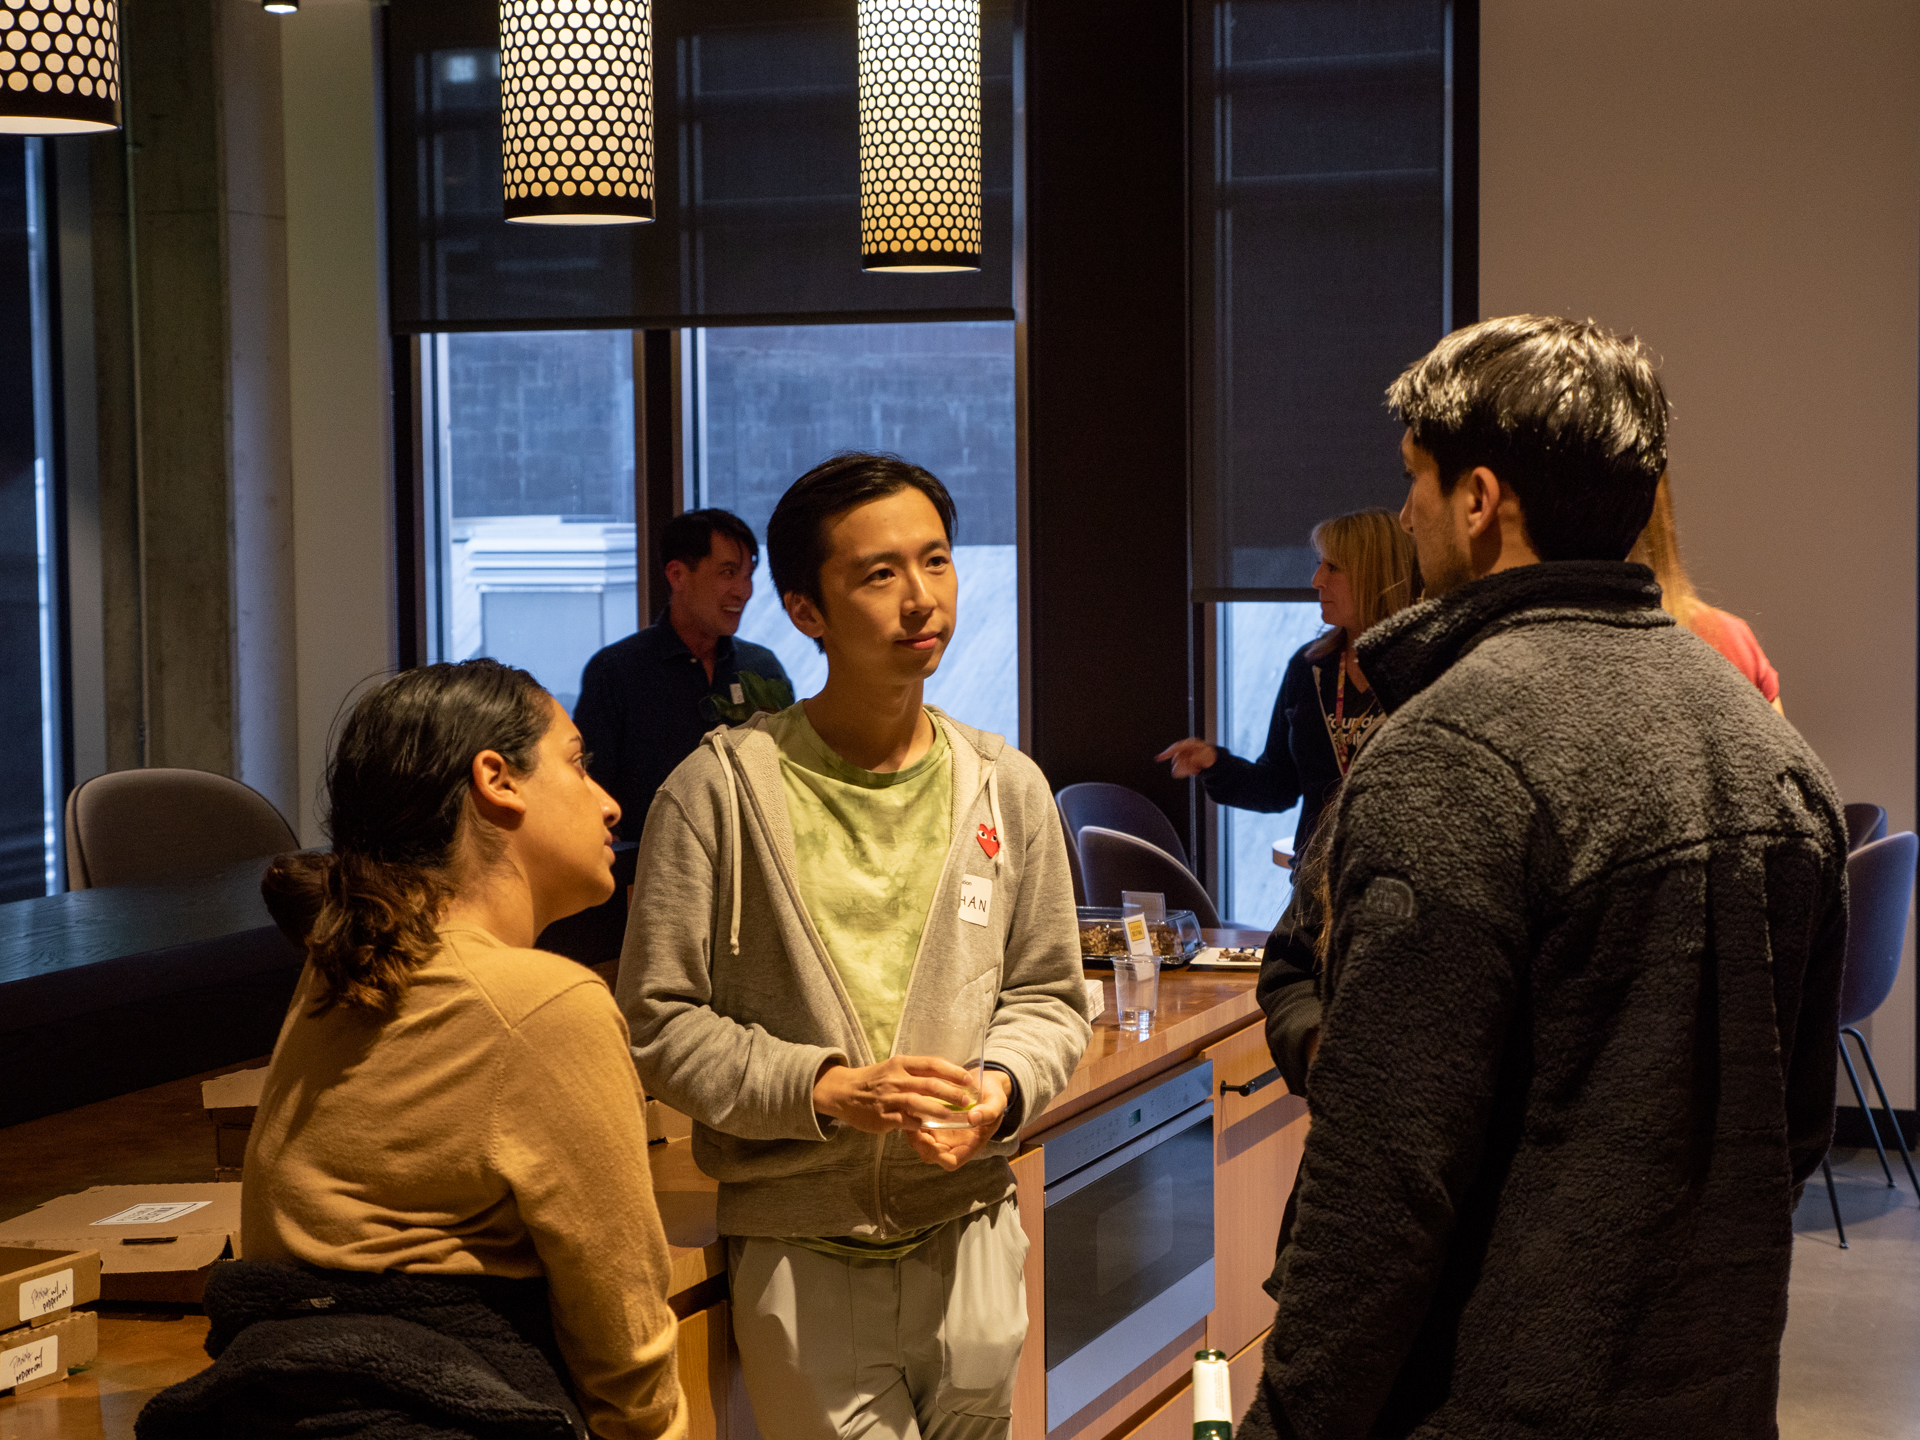 People mingling at the Stanford crypto happy hour event